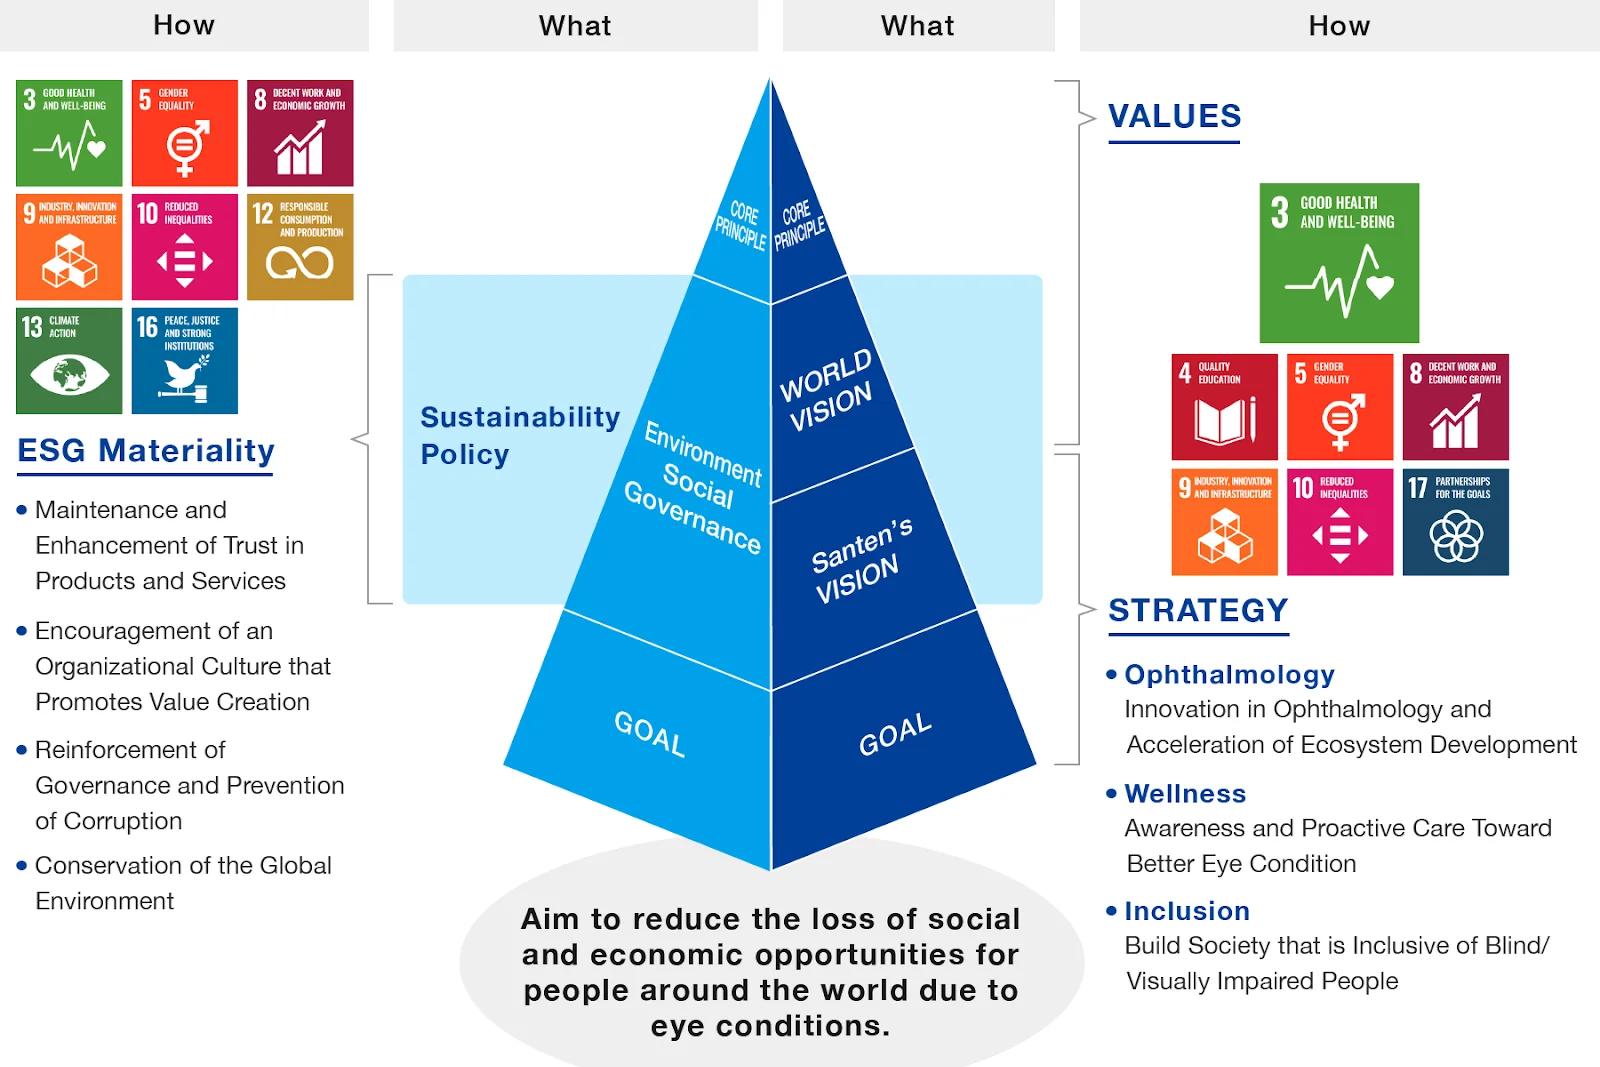 Santen sustainability policy incorporating the standpoint of ESG into the WORLD VISON